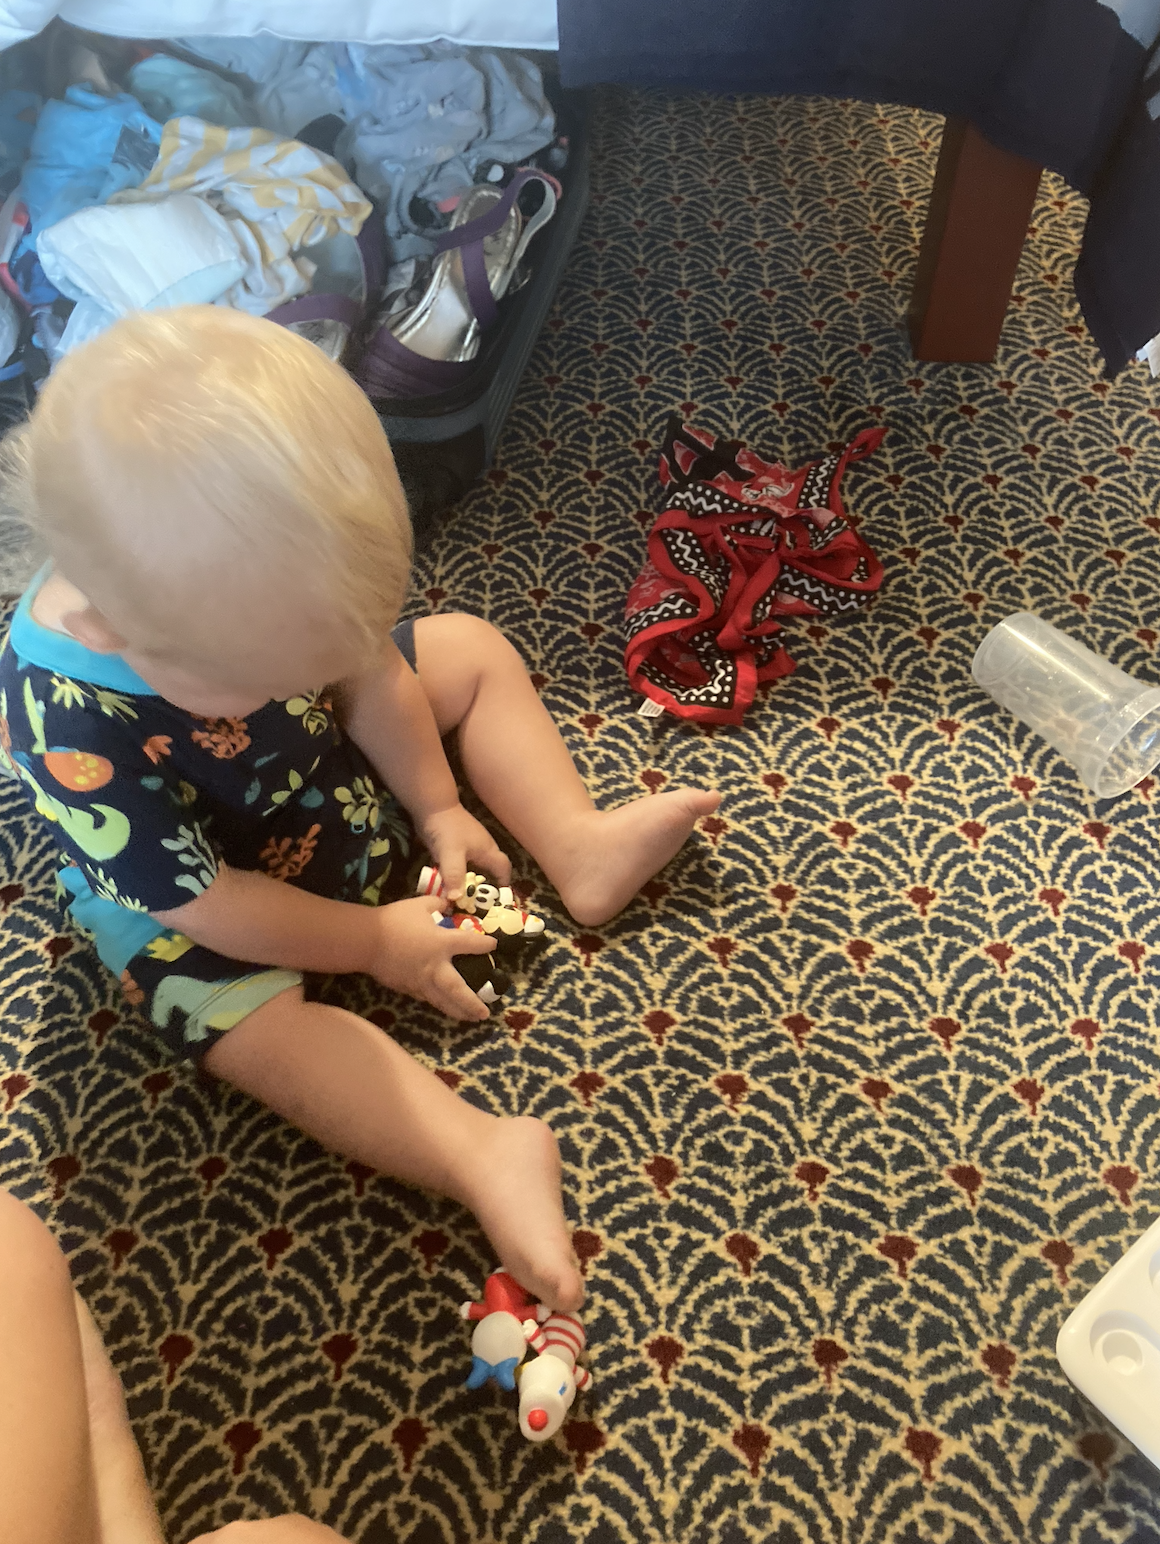 A toddler sits on a patterned carpet playing with Disney toys, surrounded by scattered items near a bed